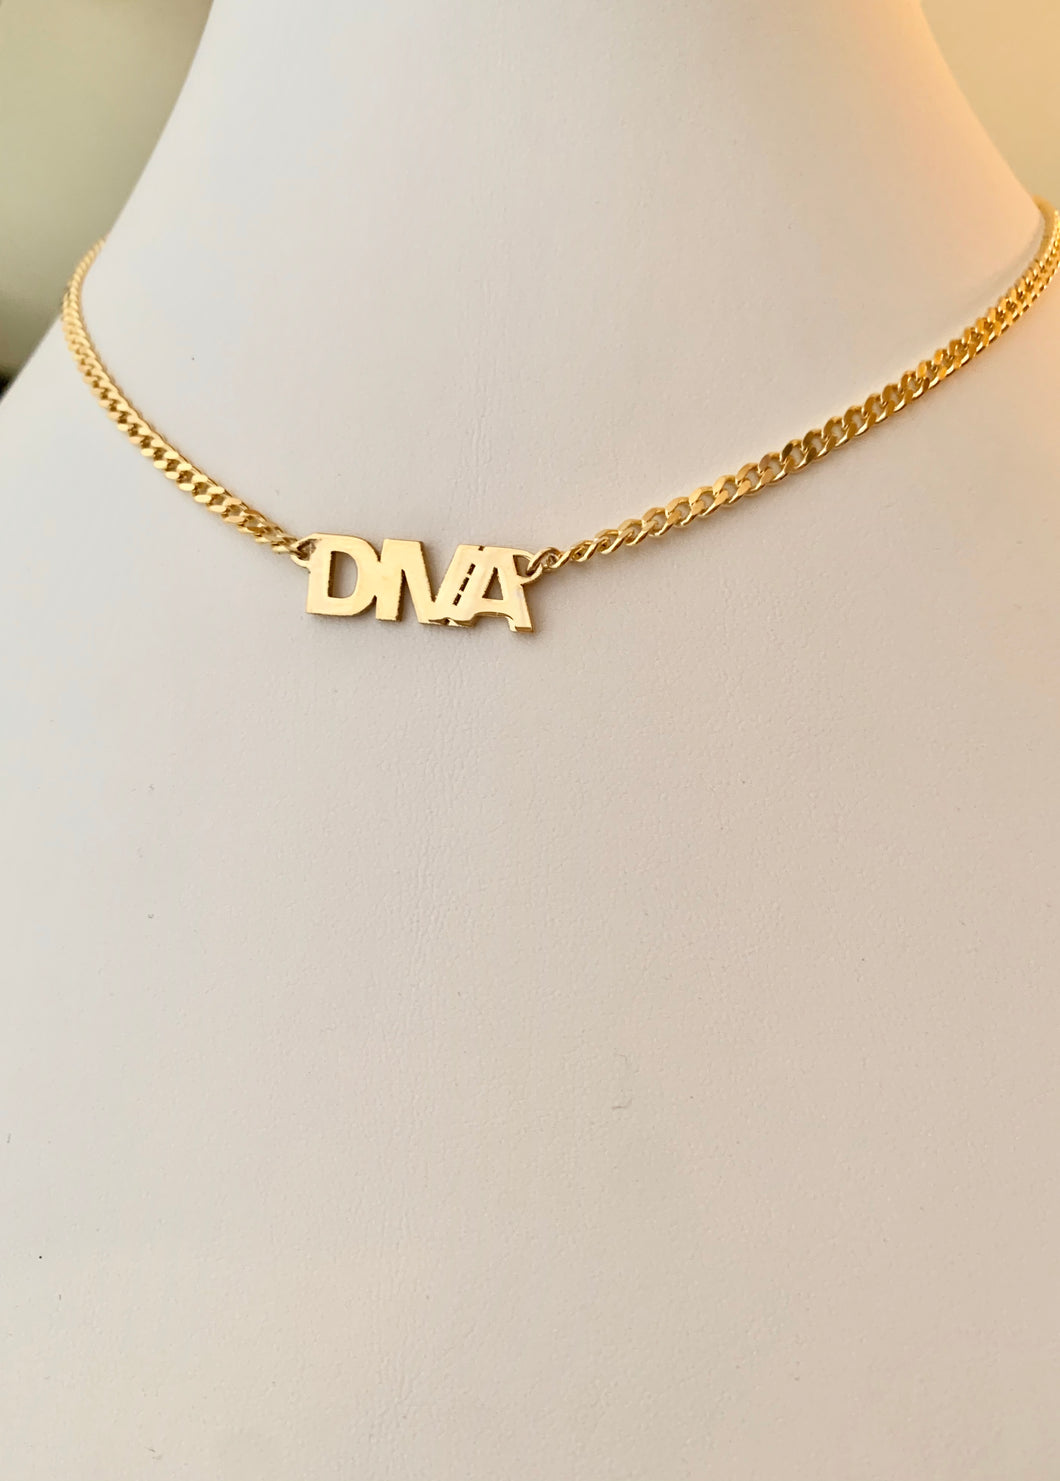 Personalized Diva Font Necklace